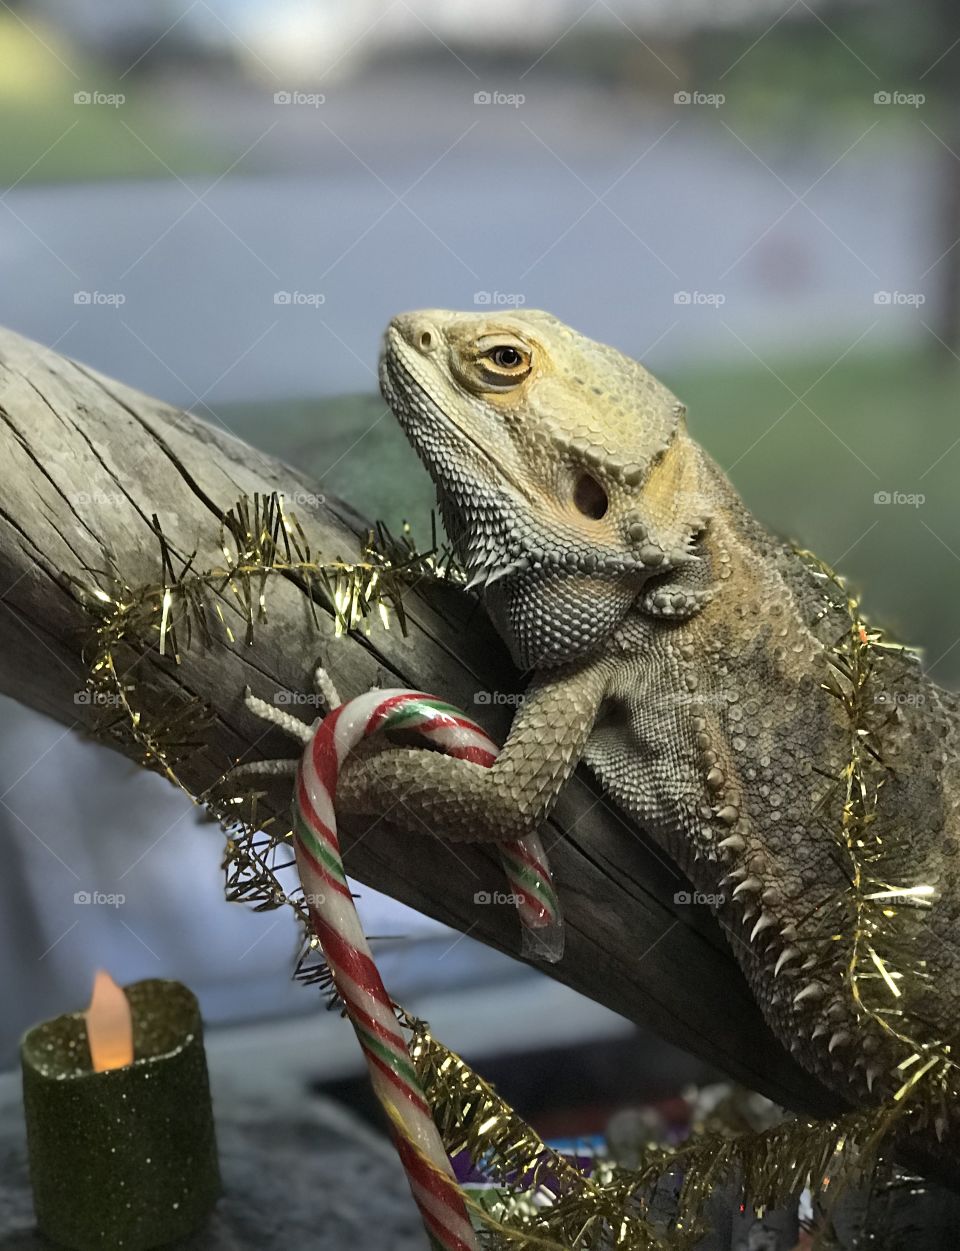 Stormy the bearded dragon is celebrating Christmas too! A little cardboard church, some battery powered candles, Christmas paper to line his cage, a string of lights, a gold garland to wrap himself with and a candy cane for a treat!